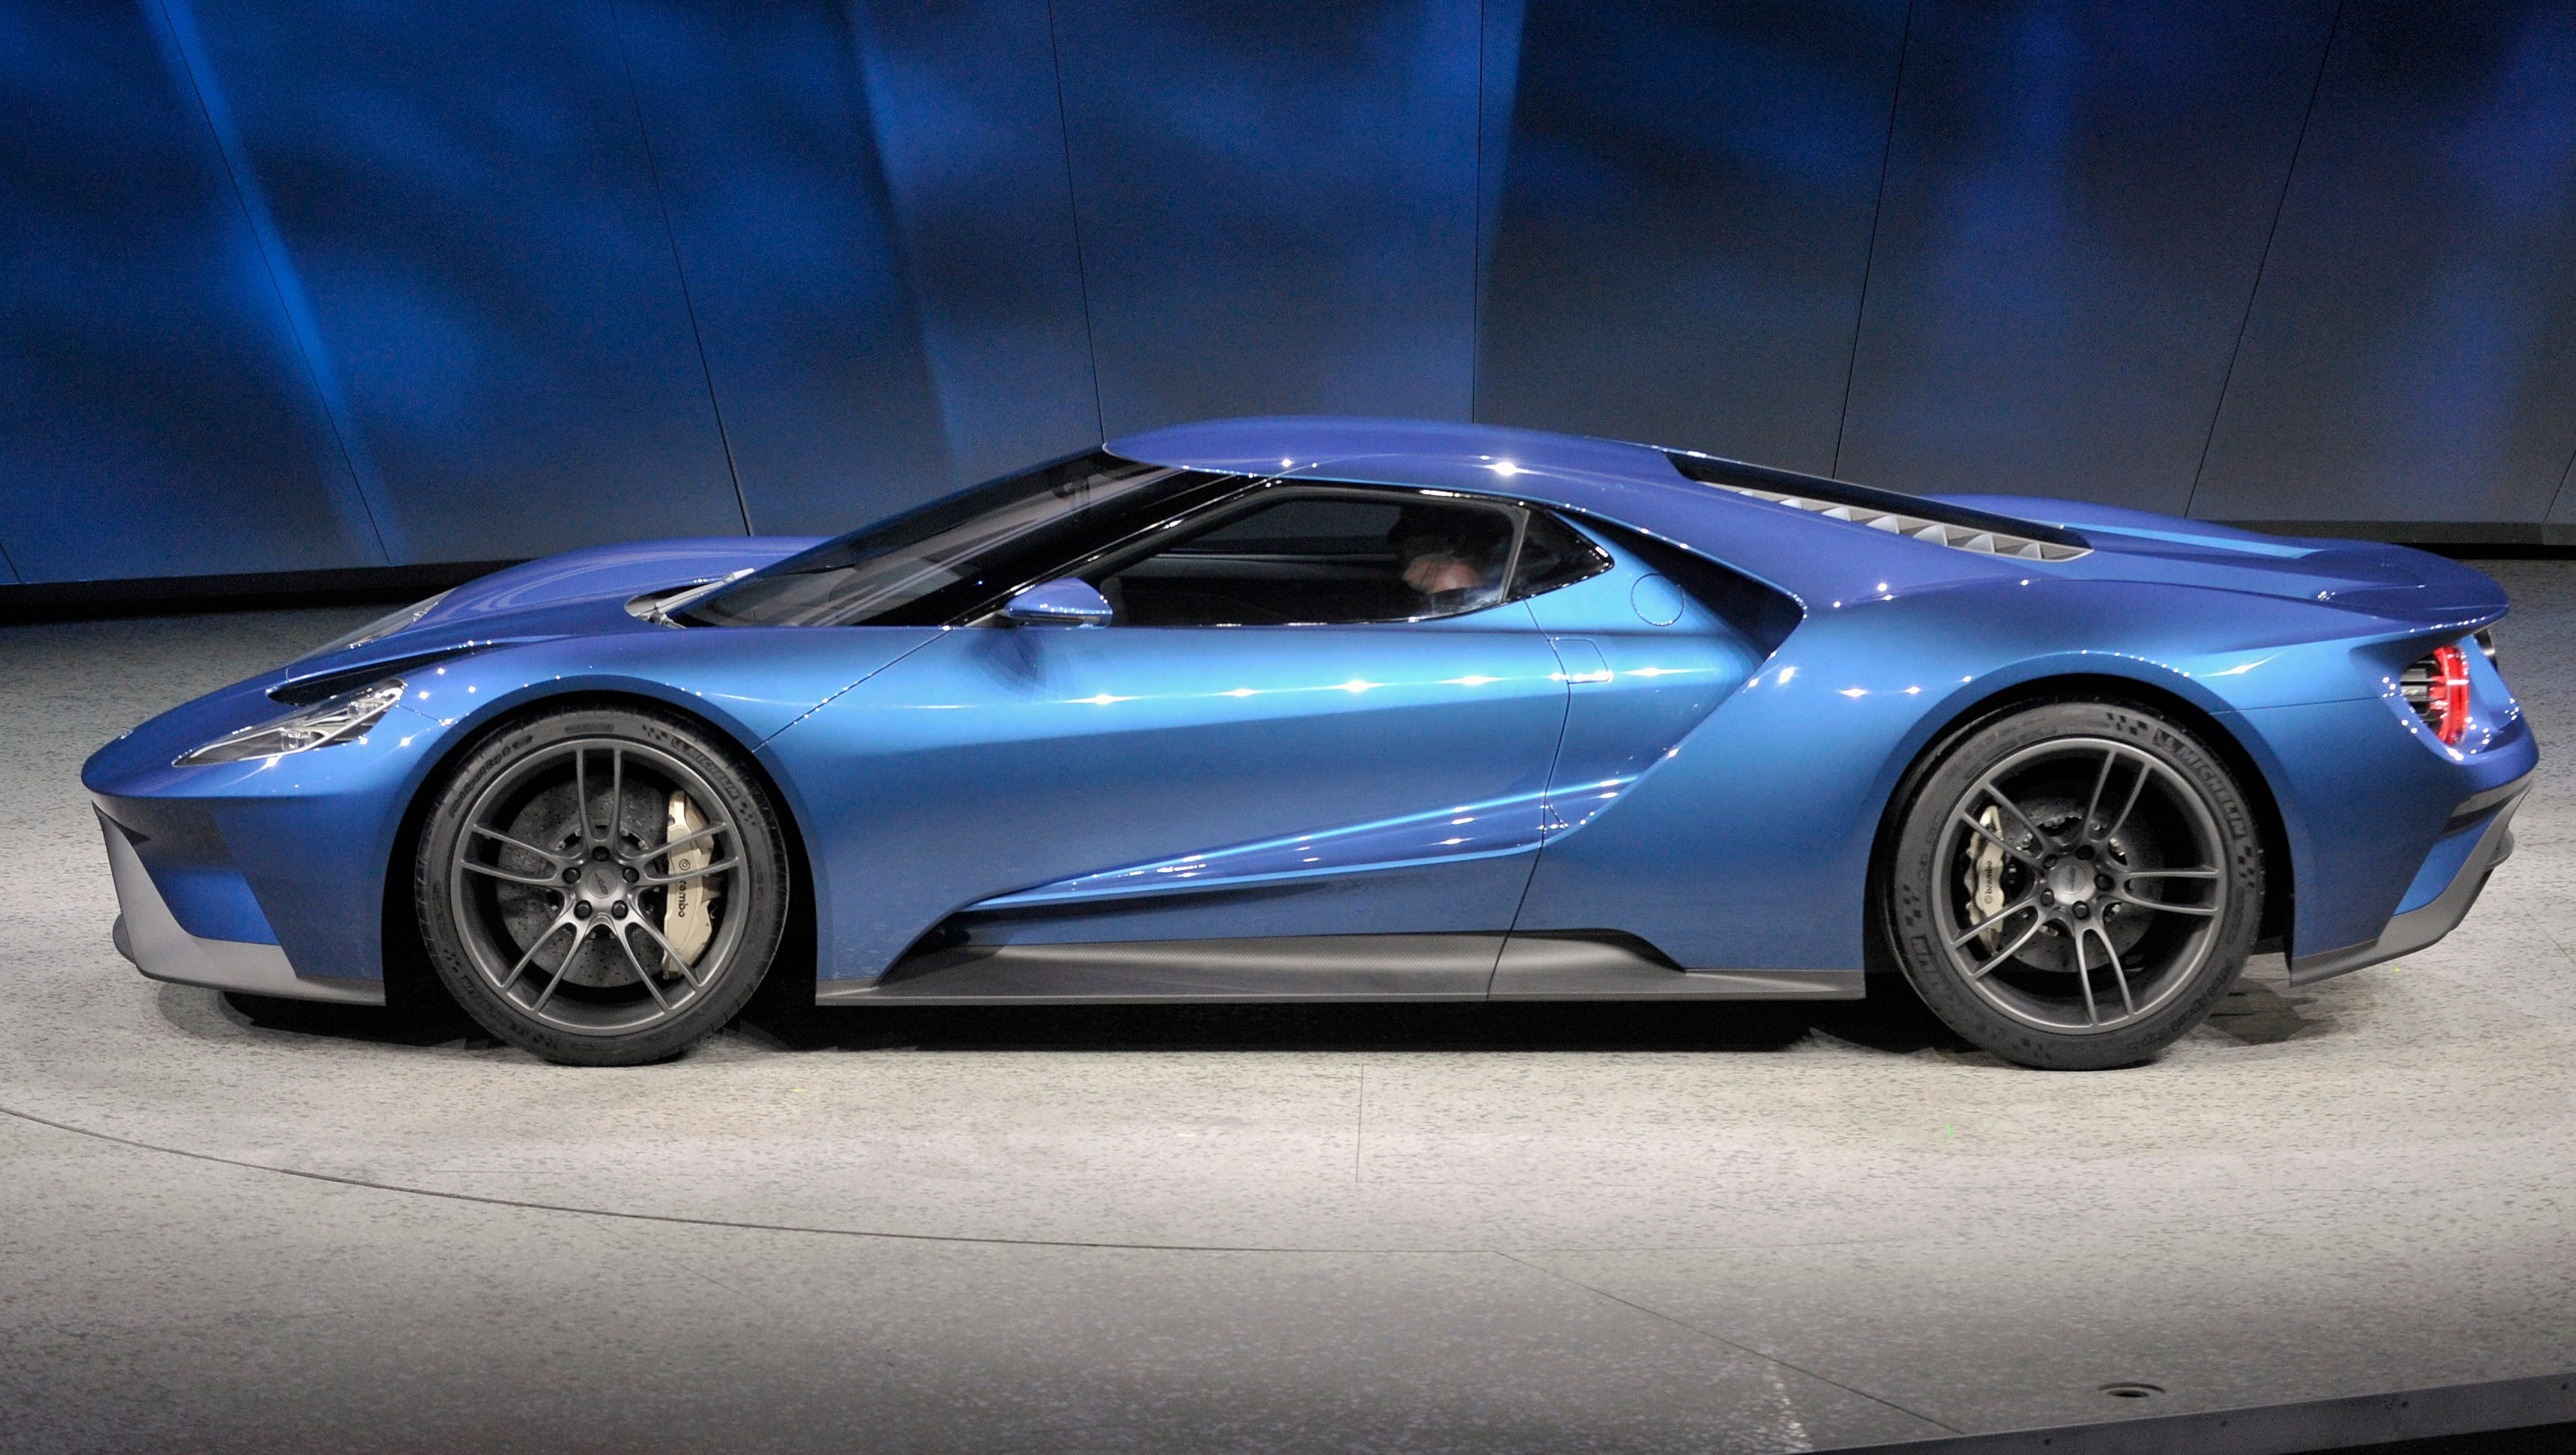 The Ford GT's unveiling last year prompted a number of tweets from Detroit Tigers pitcher Justin Verlander, who has been appreciative of the GT's features and has asked how to buy one.